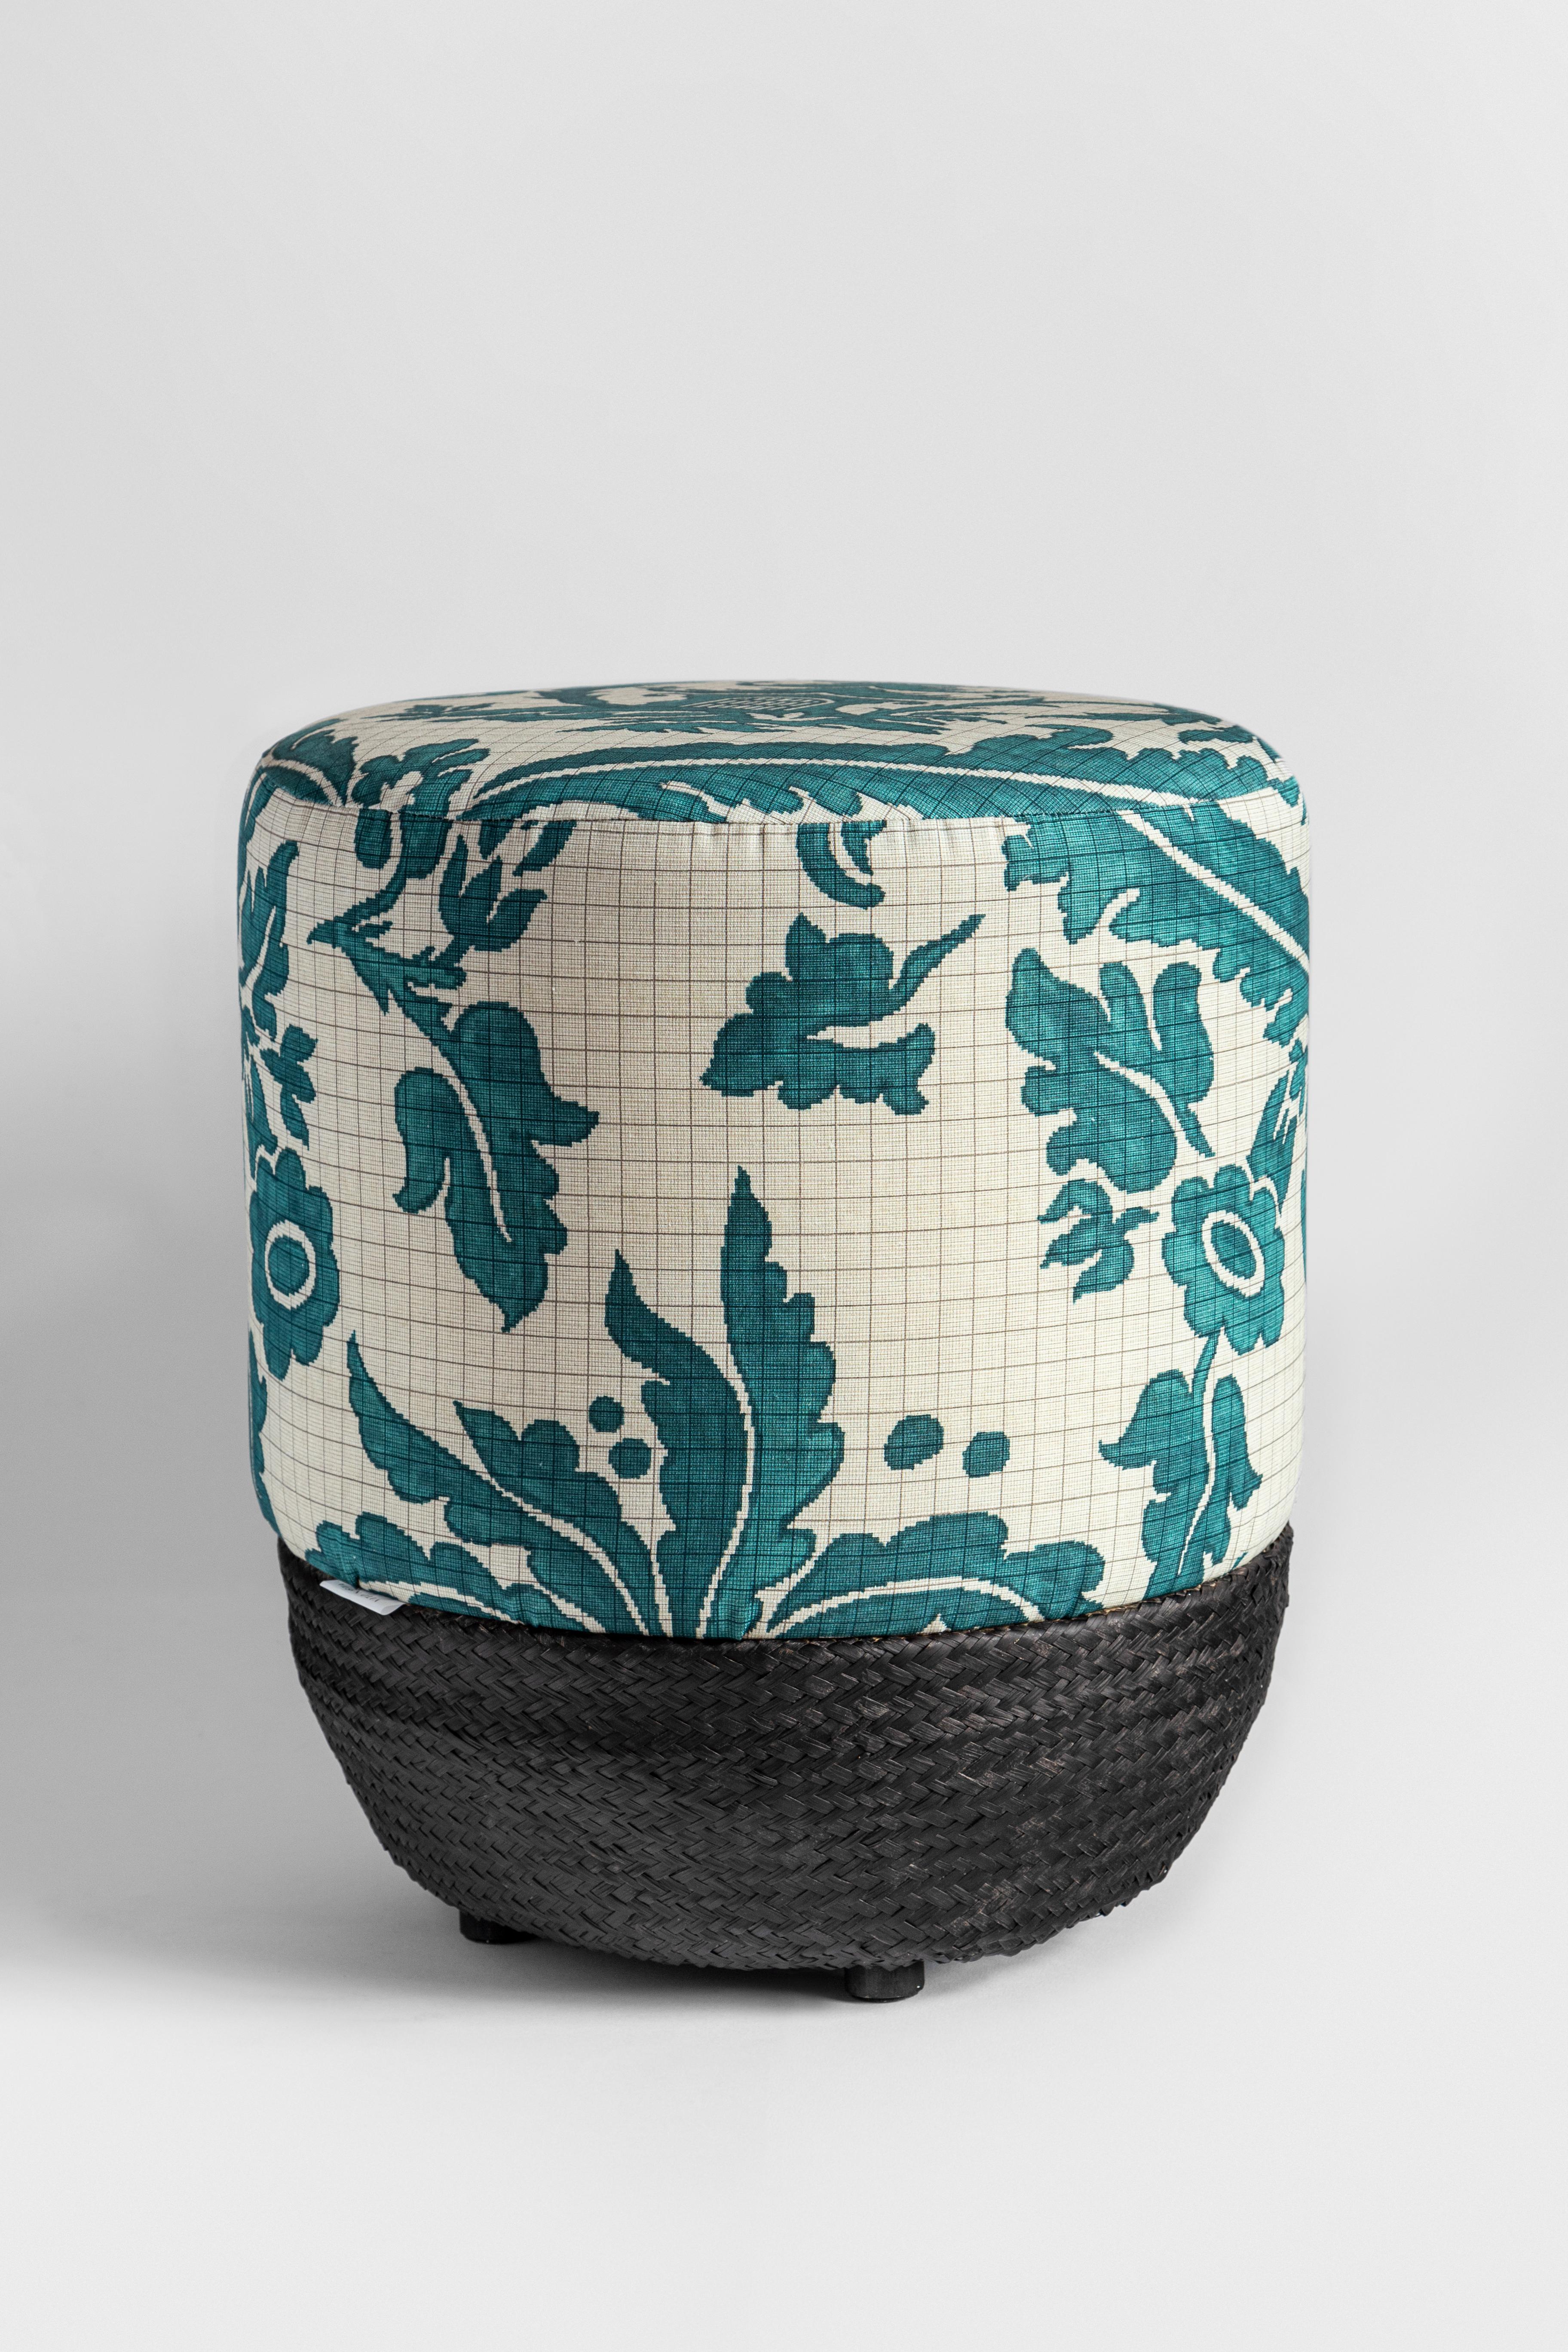 This pouf features a rather unique design: a Chinese-inspired, turquoise motif of a phoenix, a pagoda, and some fronds. These are well arranged over a delicate black squared grid that stands out on top of a white background. This style, typical of